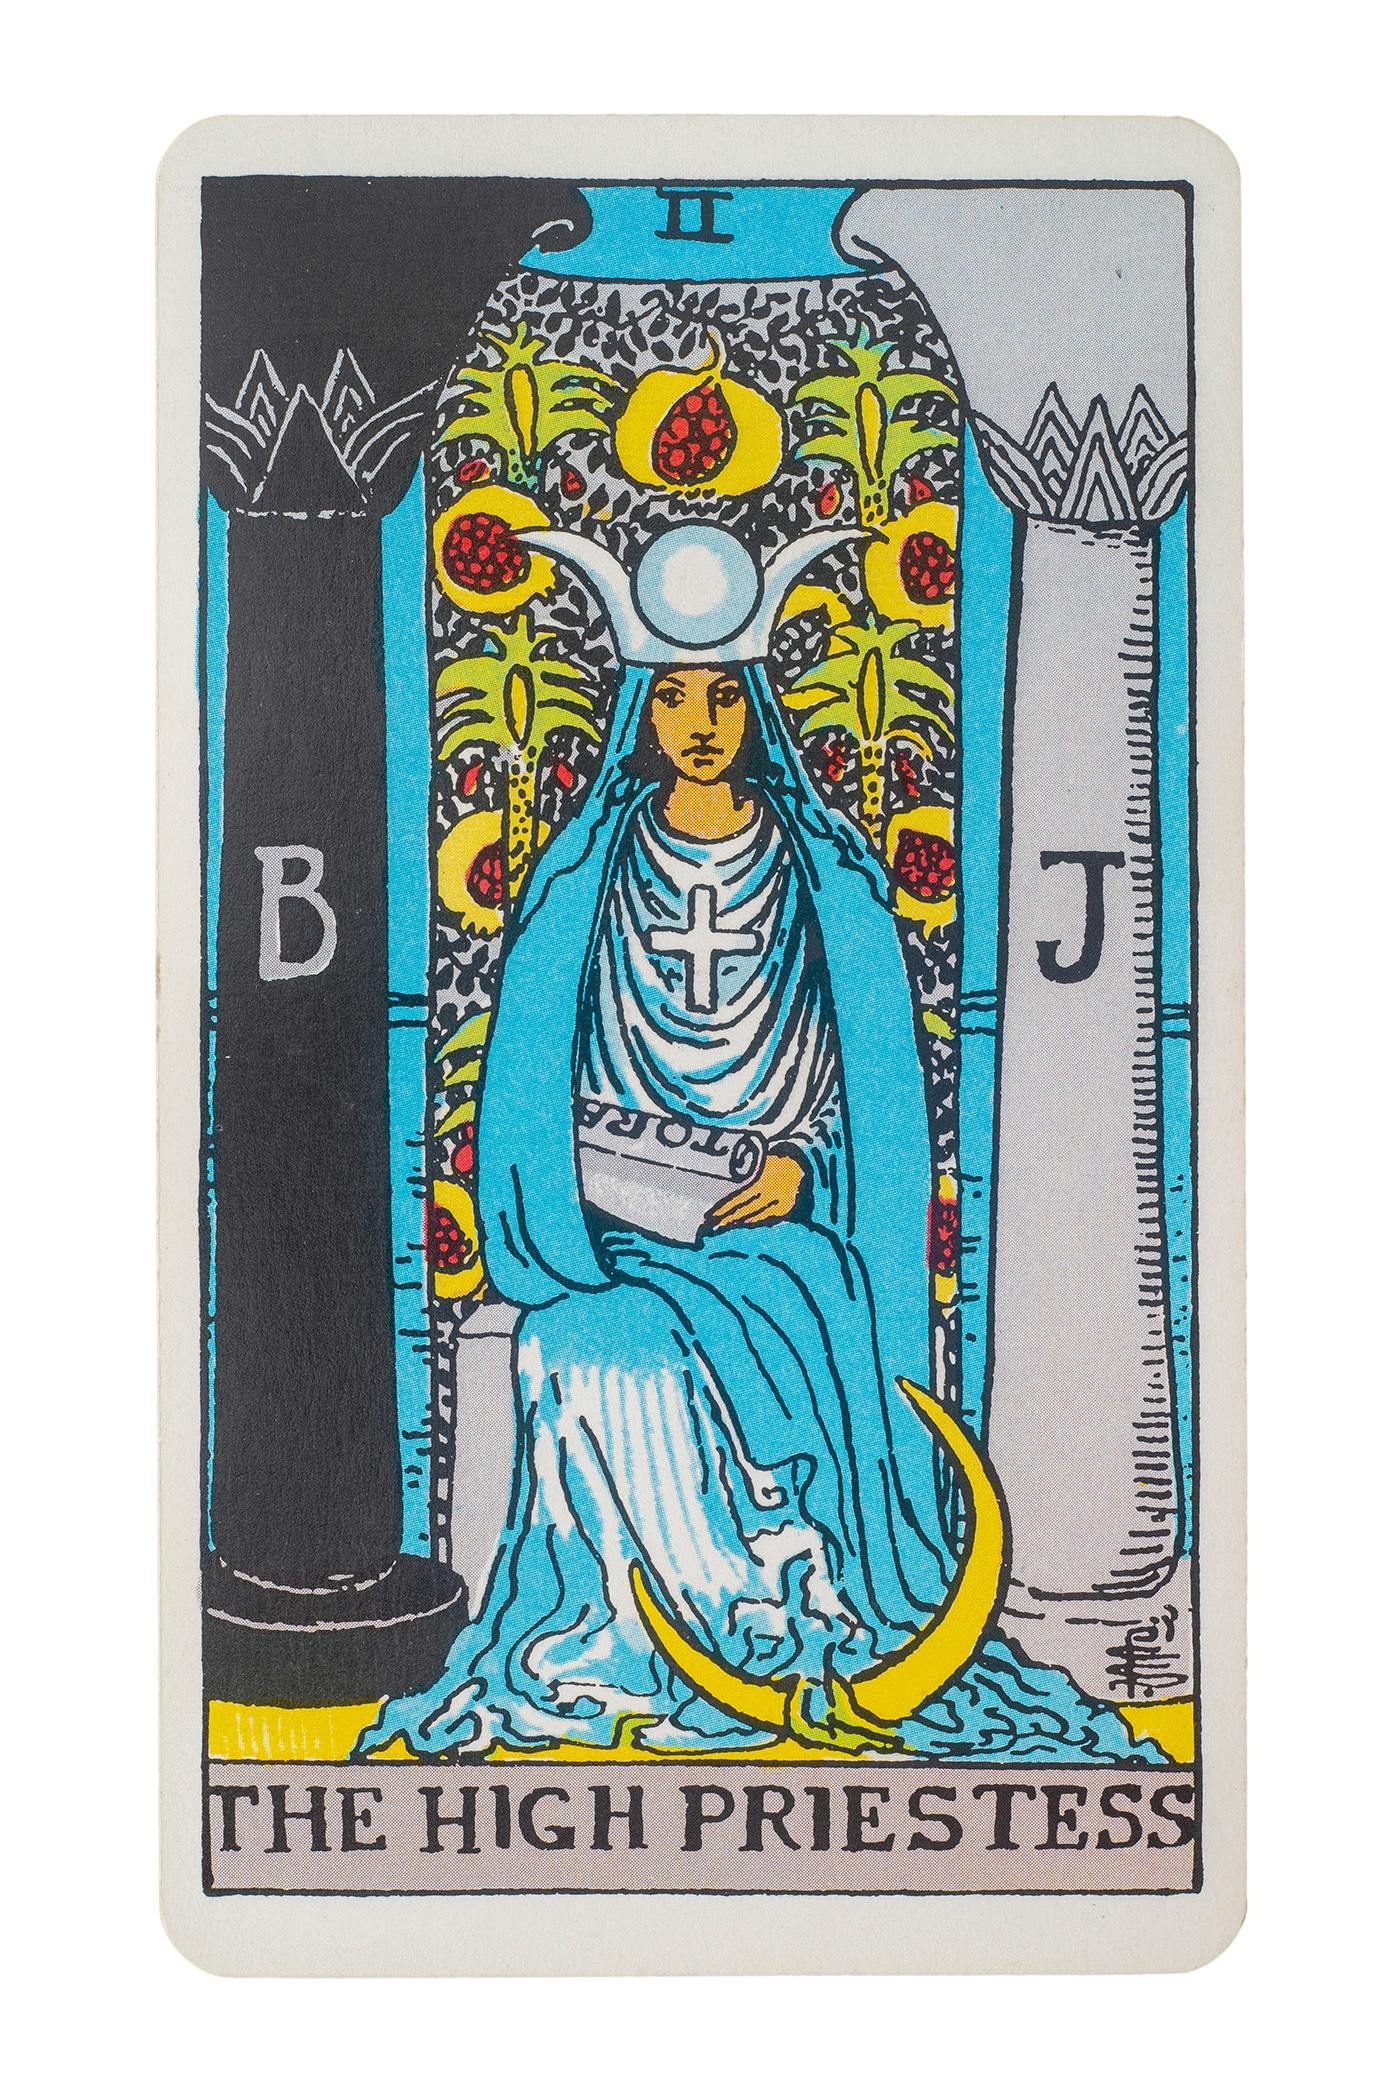 The High Priestess card. Features a women sitting in between two pillars with the moon at her feet.